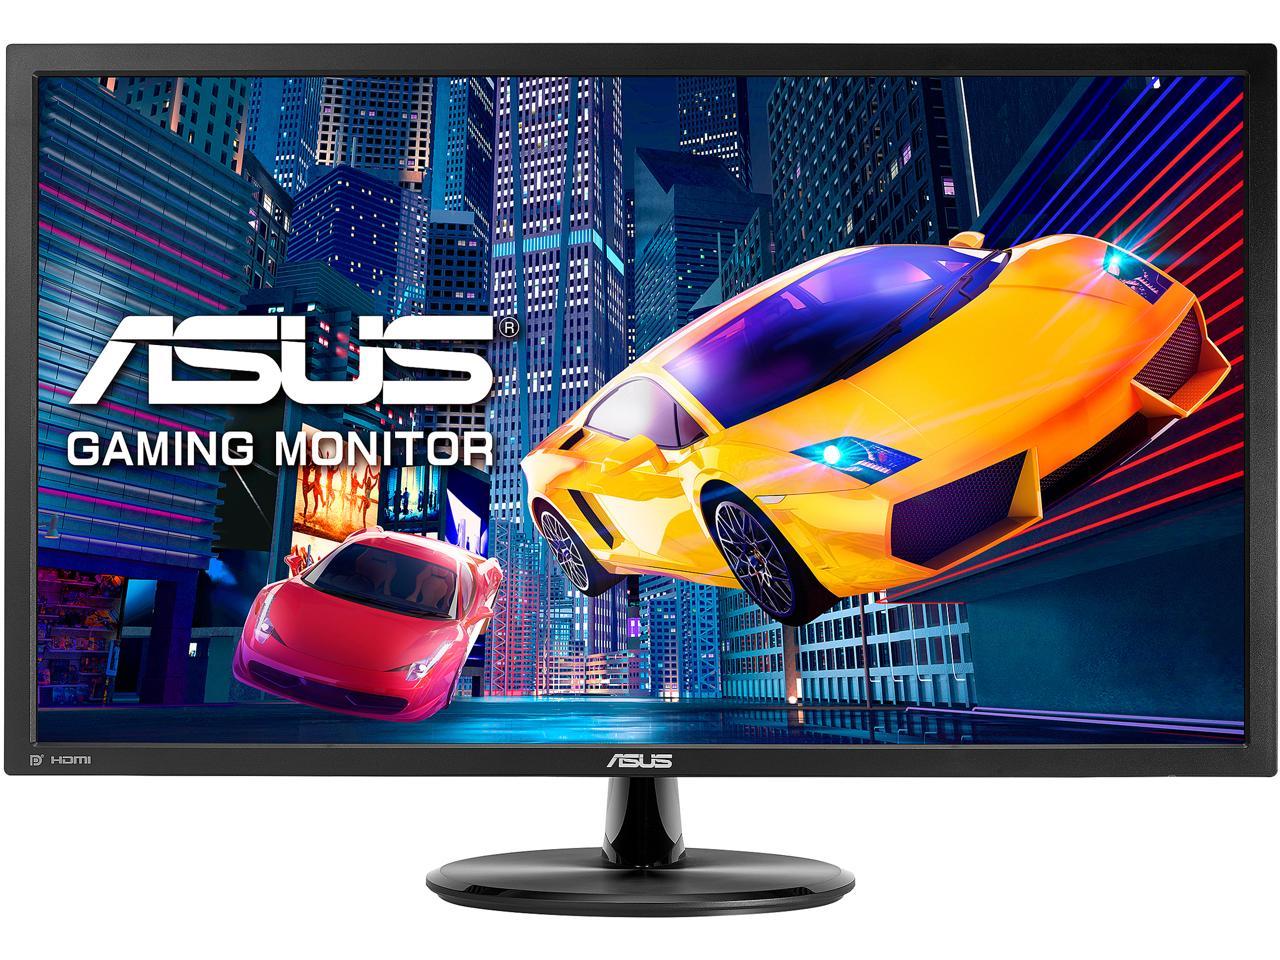 ASUS VP28UQG 28" Ultra HD 3840 x 2160 4K Resolution 1ms 2 x HDMI, DisplayPort FreeSync Technology Asus Eye Care with Ultra Low-Blue Light Flicker-Free Technology Widescreen LED Backlit LCD Monitor